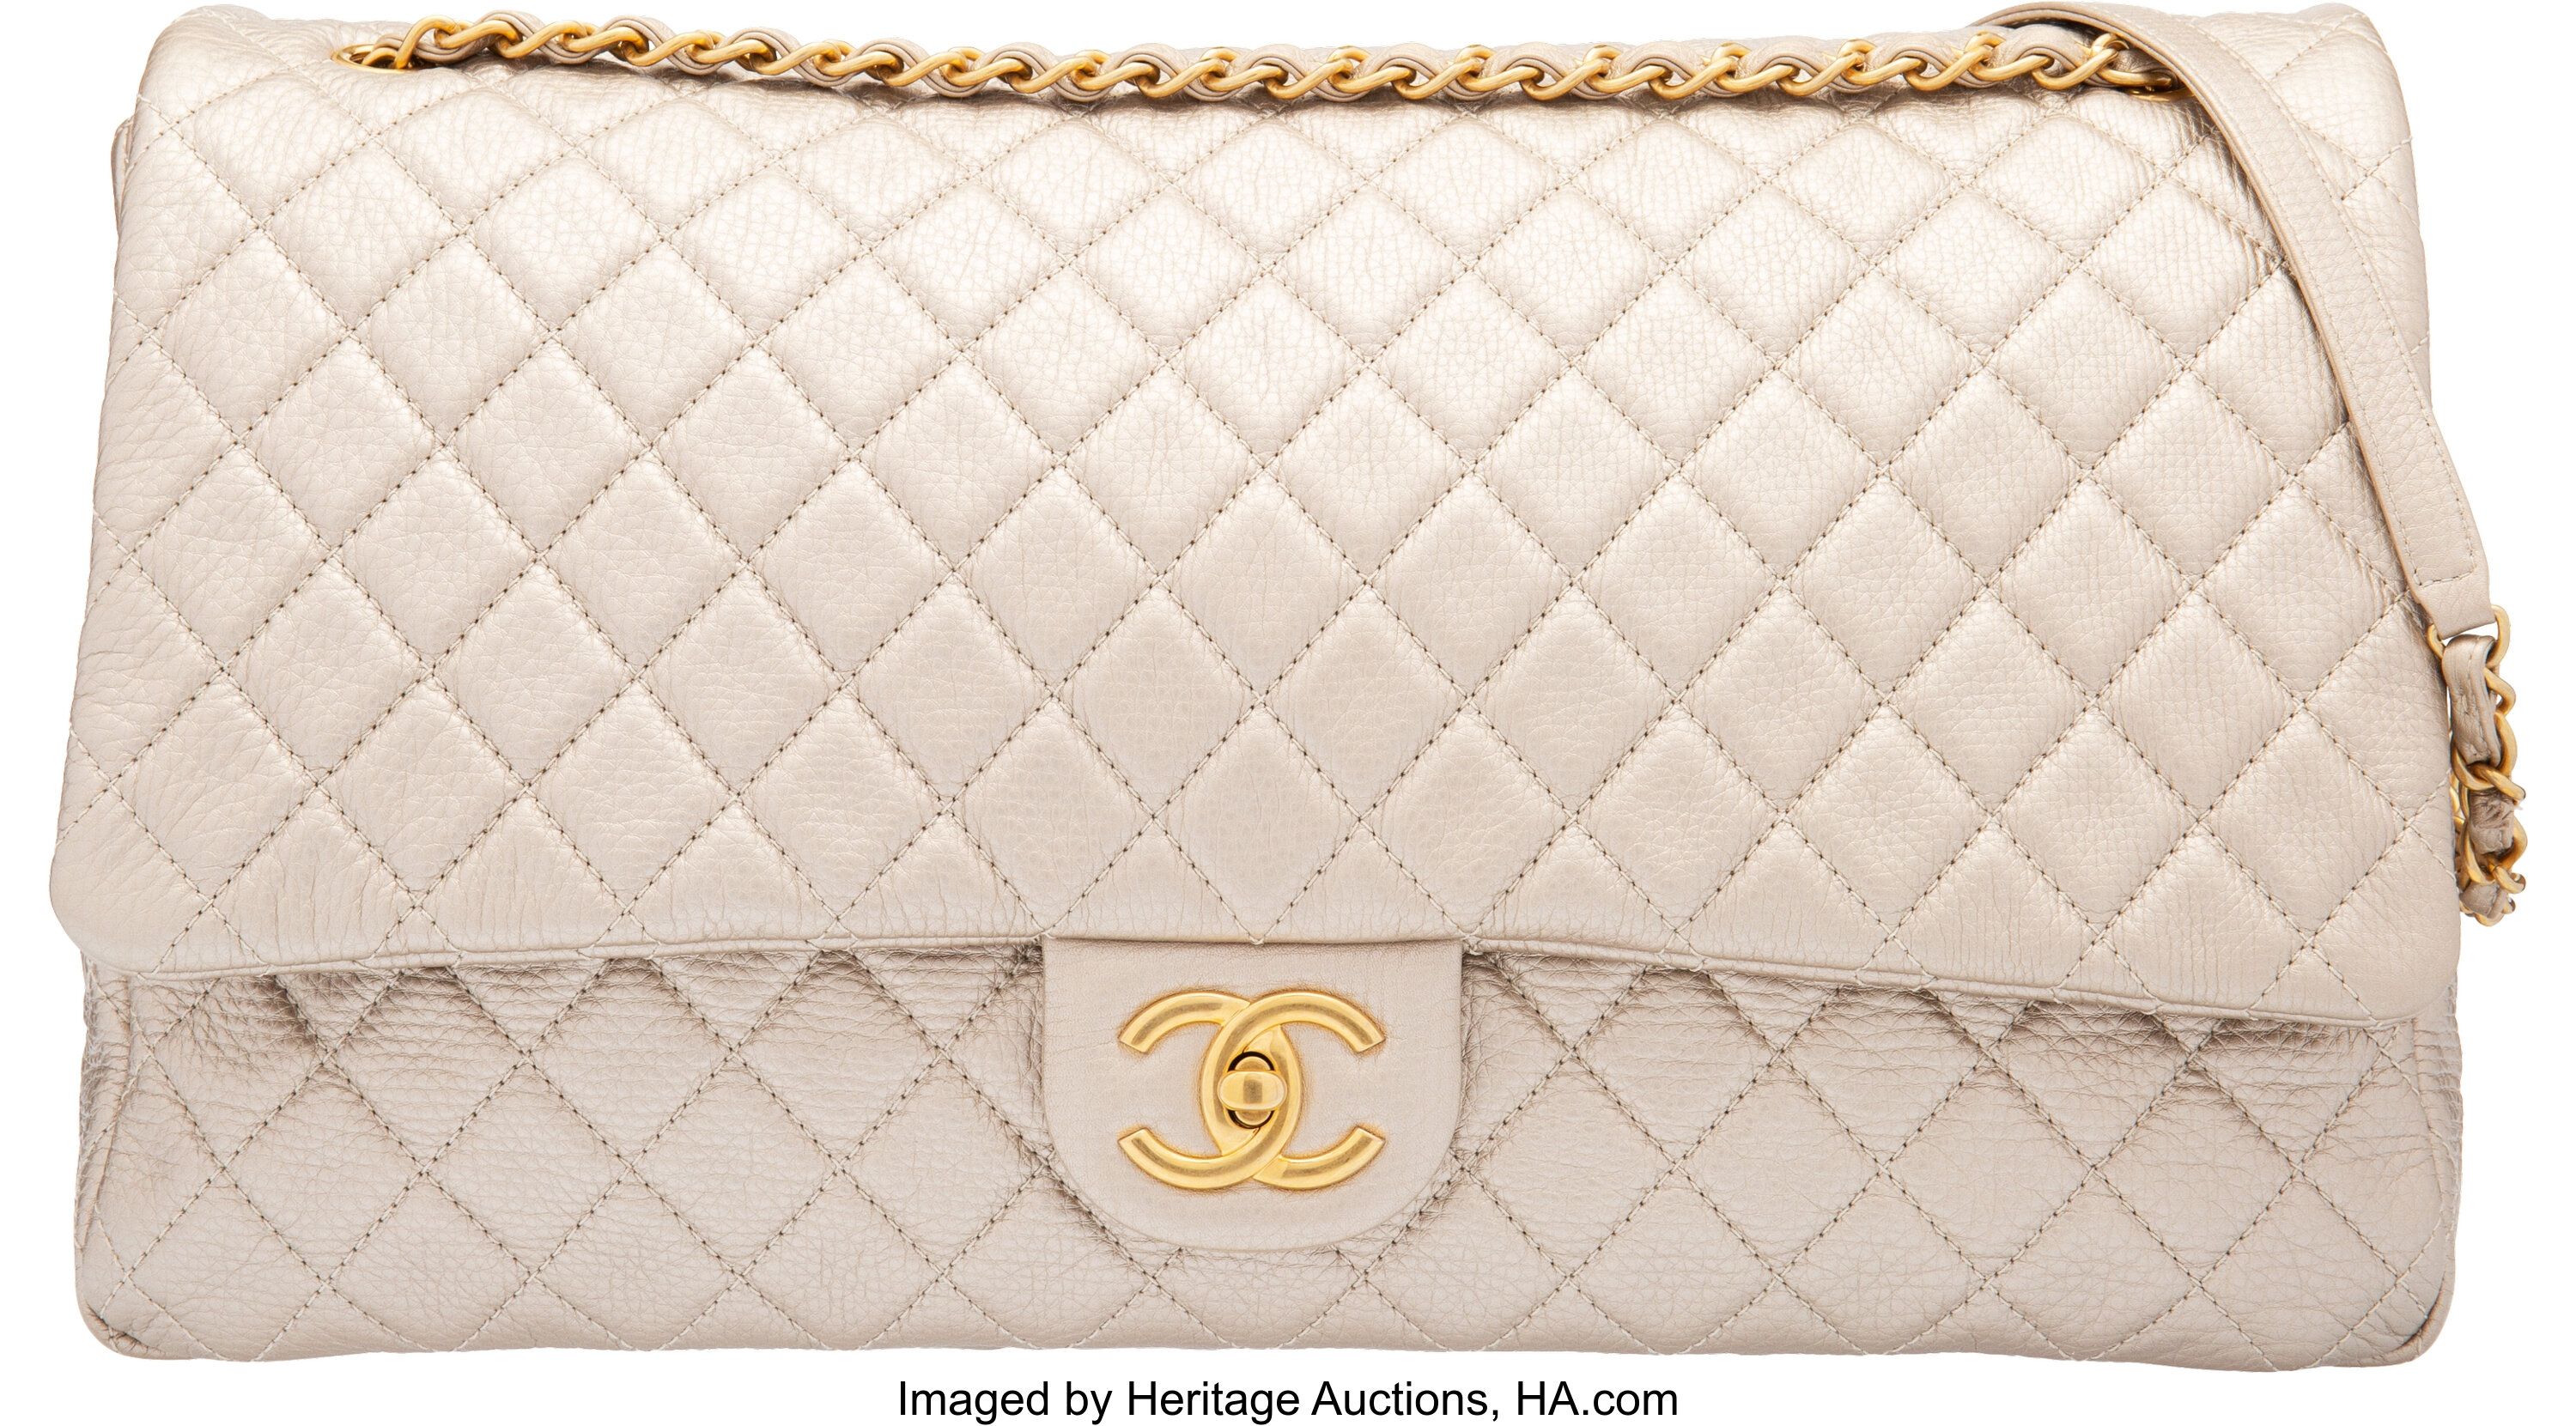 Chanel Metallic Beige Quilted Calfskin Leather XXL Airline Flap Bag, Lot # 15051